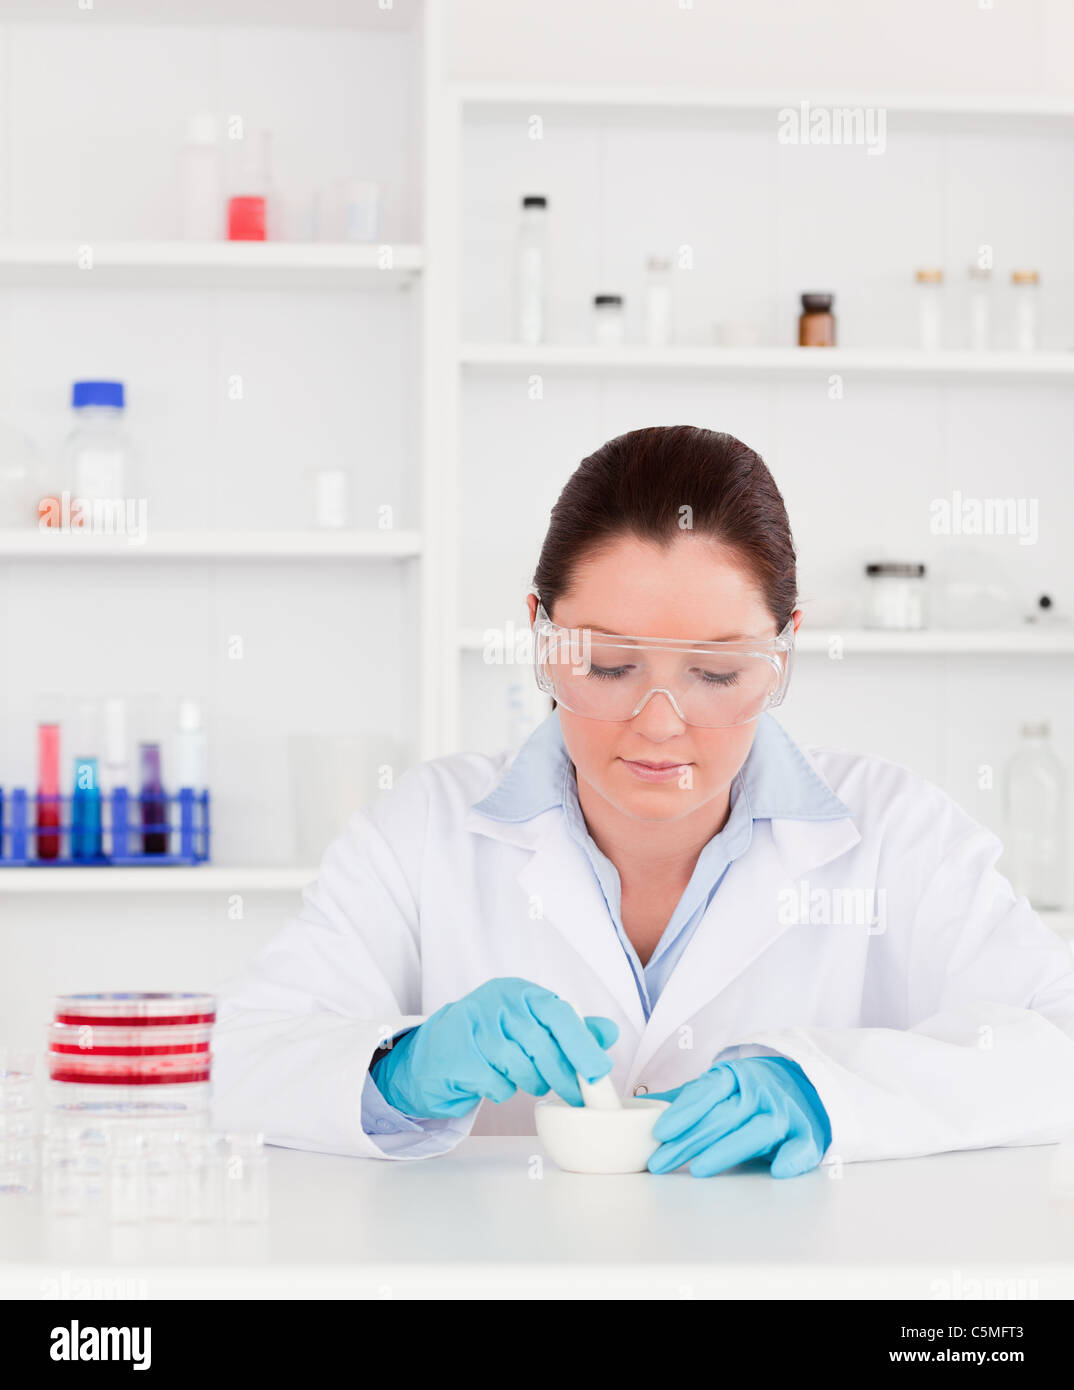 Young scientist preparing an experimentation wearing gloves Stock Photo